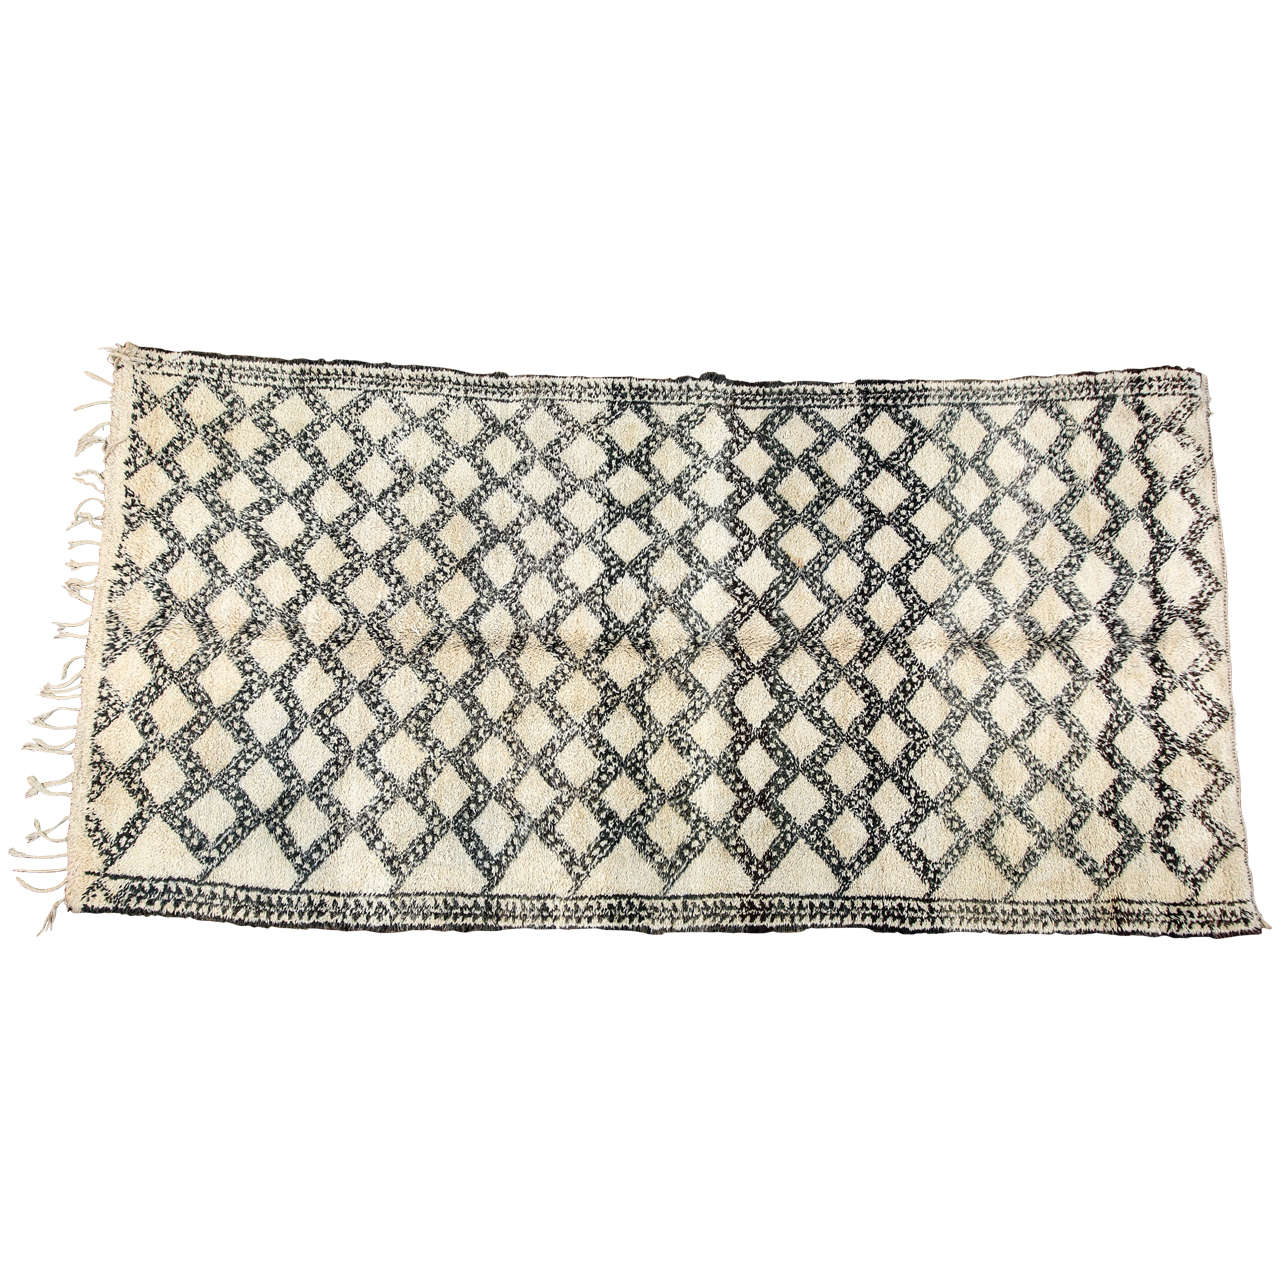 Vintage tribal Moroccan shaggy and lush Berber rug from the Beni Ouarain tribes from the middle atlas mountains of Morocco, North Africa.
Moroccan shaggy tribal rug handwoven with organic un-dyed ivory wool with asymmetrical diamond shape designs